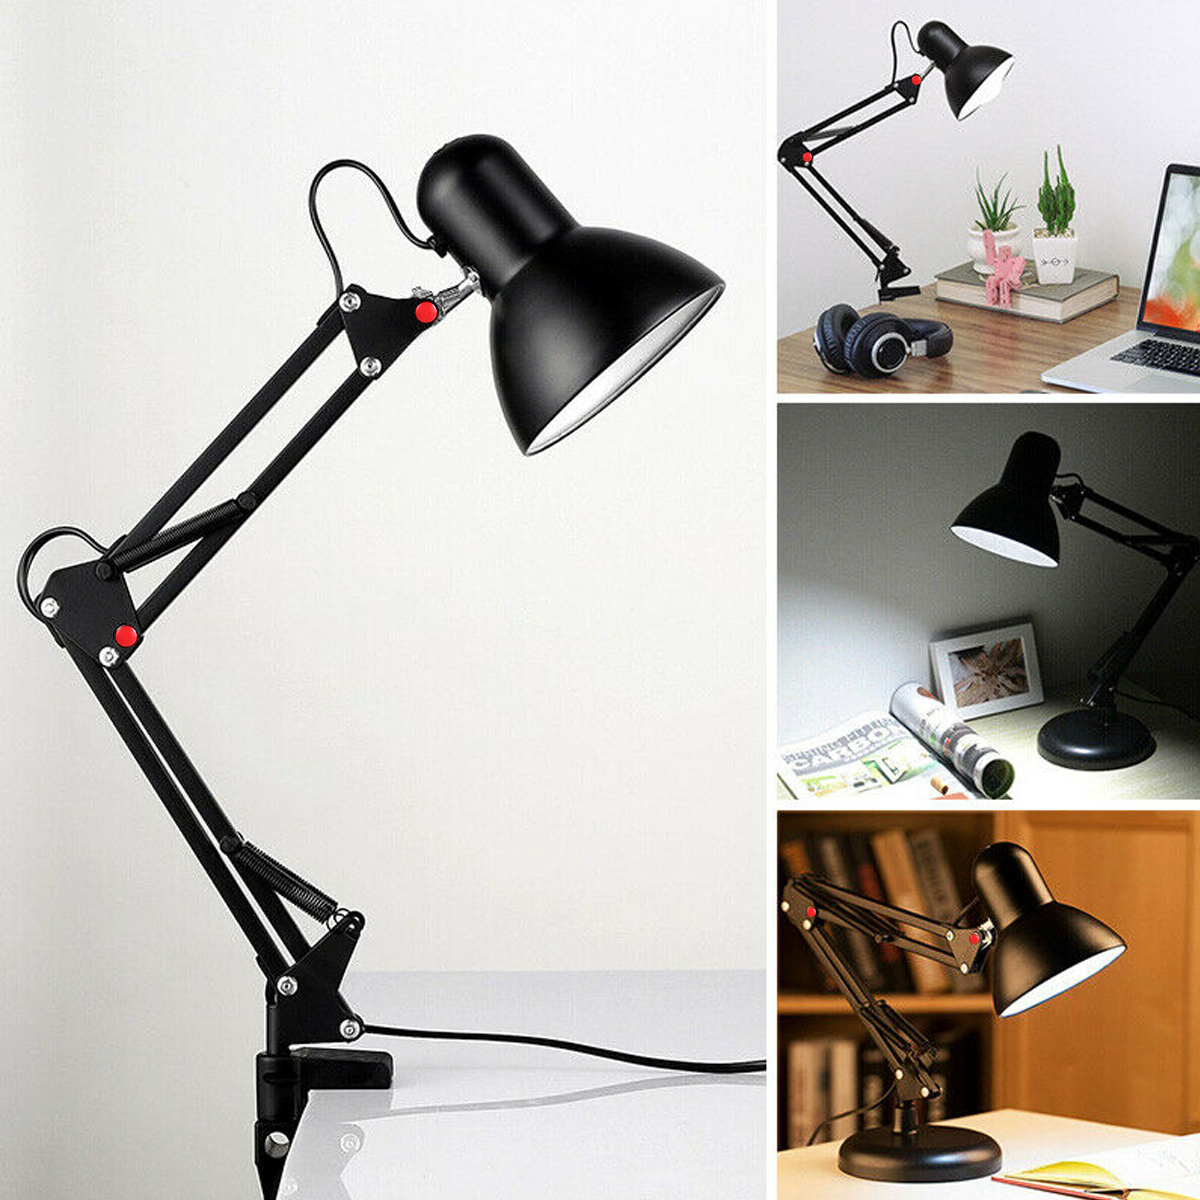 5W-Super-Bright-Swing-Arm-Desk-Lamp-Clamp-on-Table-Light-with-LED-Bulb-Metal-Clip-220V-1742397-4